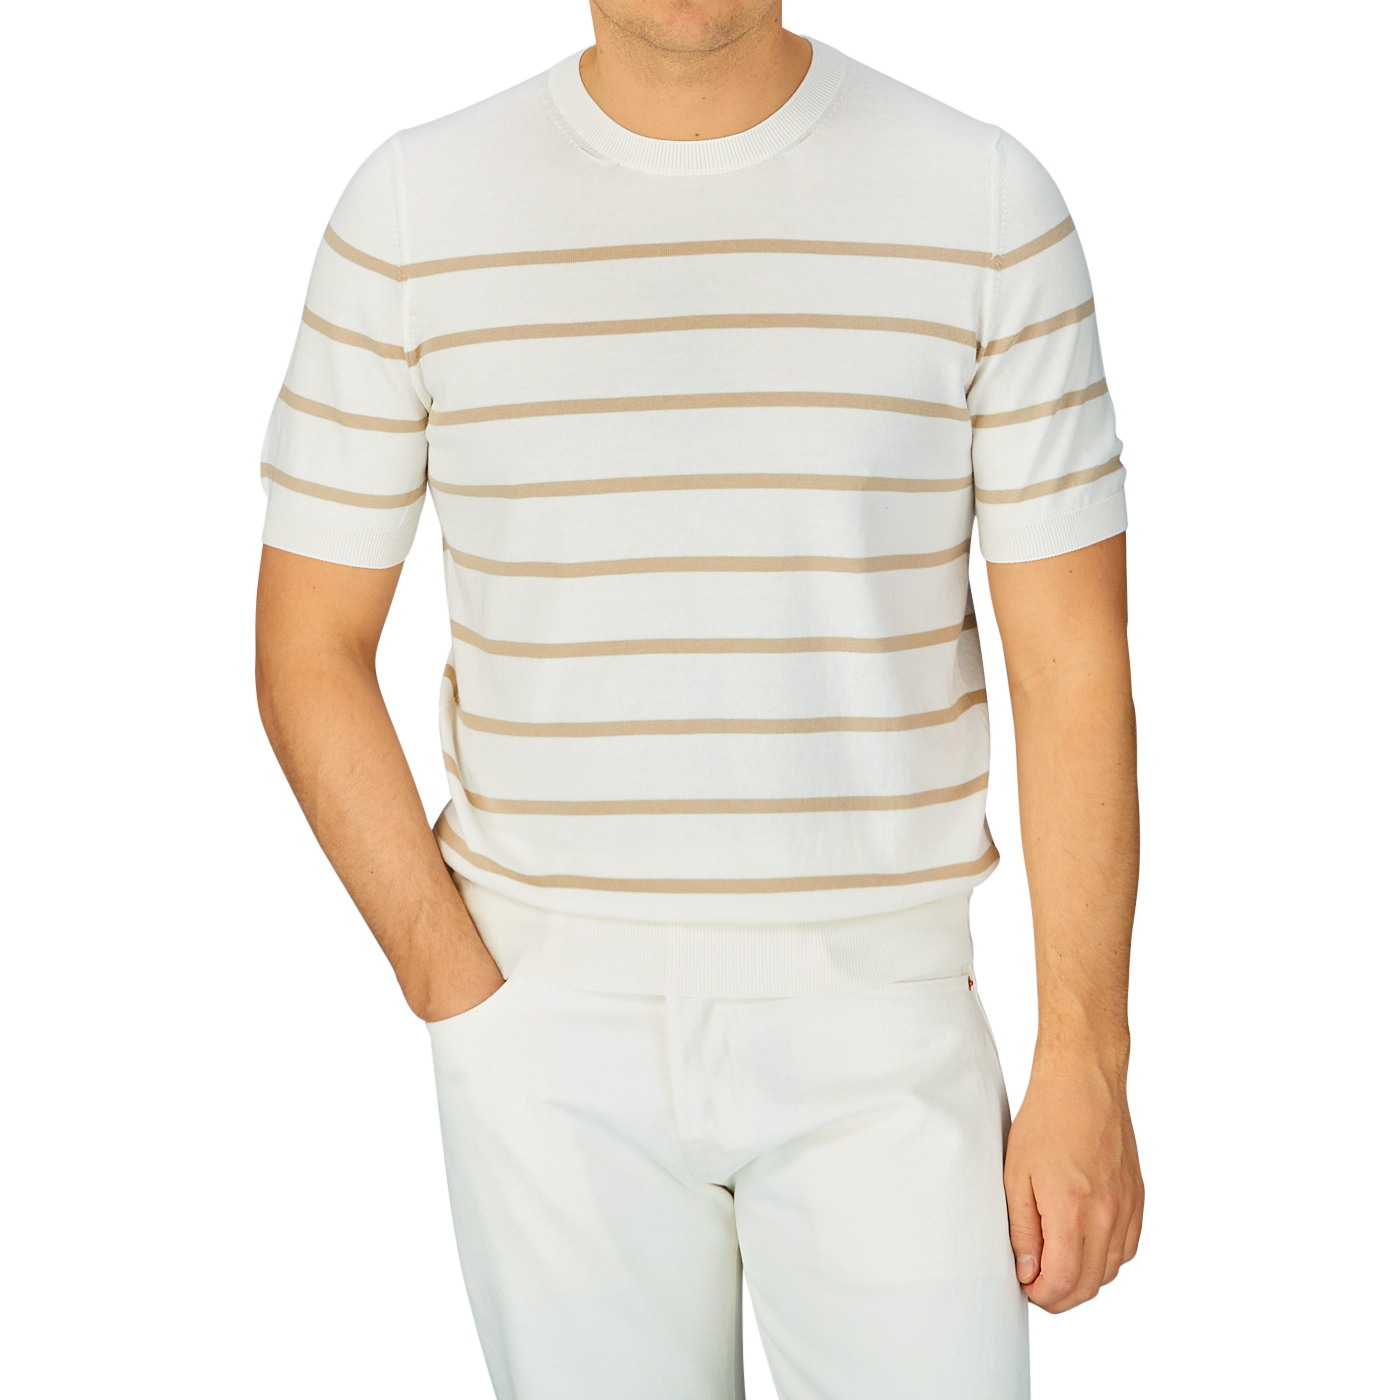 Man wearing a Cream Beige Striped Organic Cotton T-Shirt from Gran Sasso with white pants.